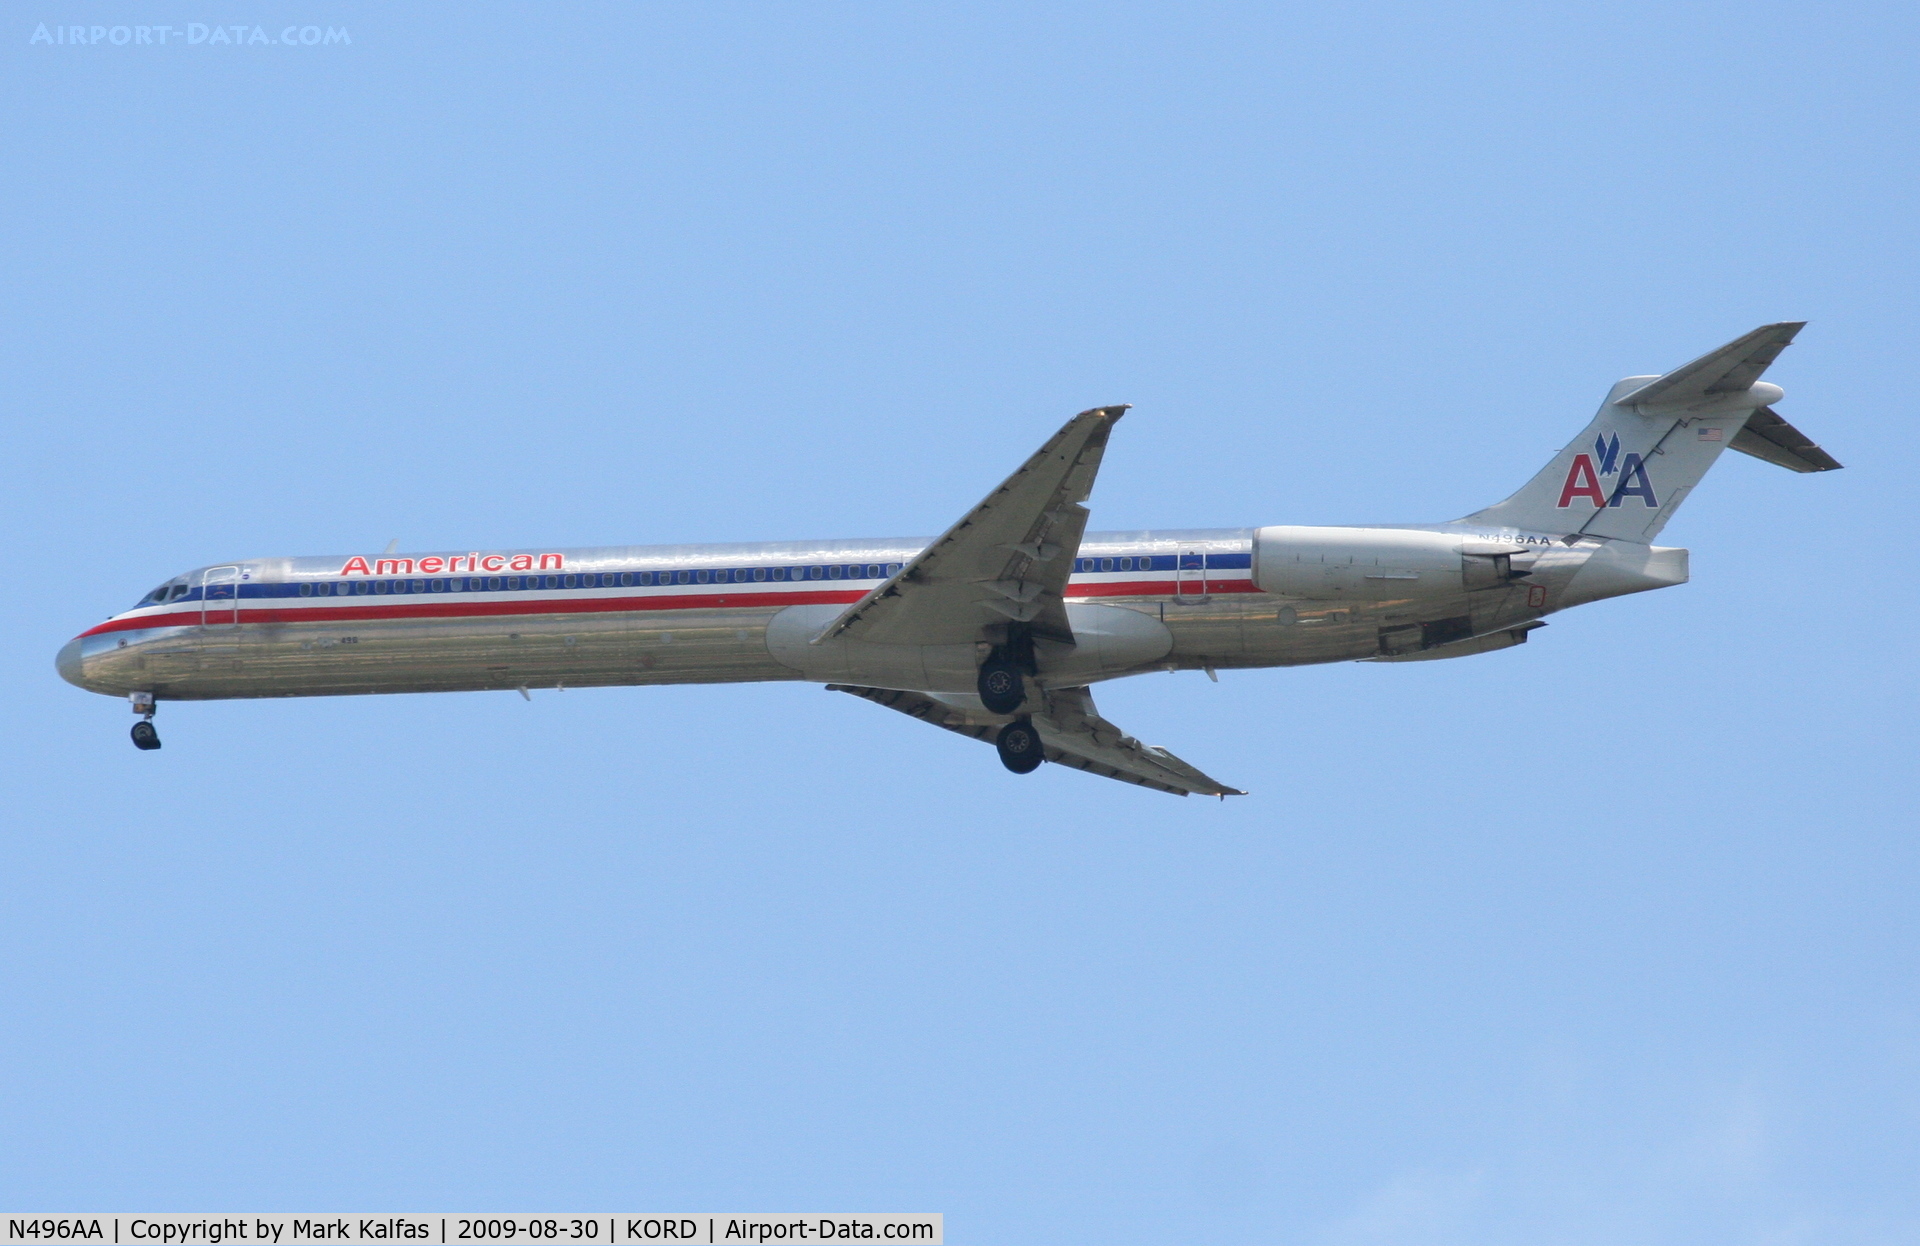 N496AA, 1989 McDonnell Douglas MD-82 (DC-9-82) C/N 49734, American Airlines on the 4R approach KORD